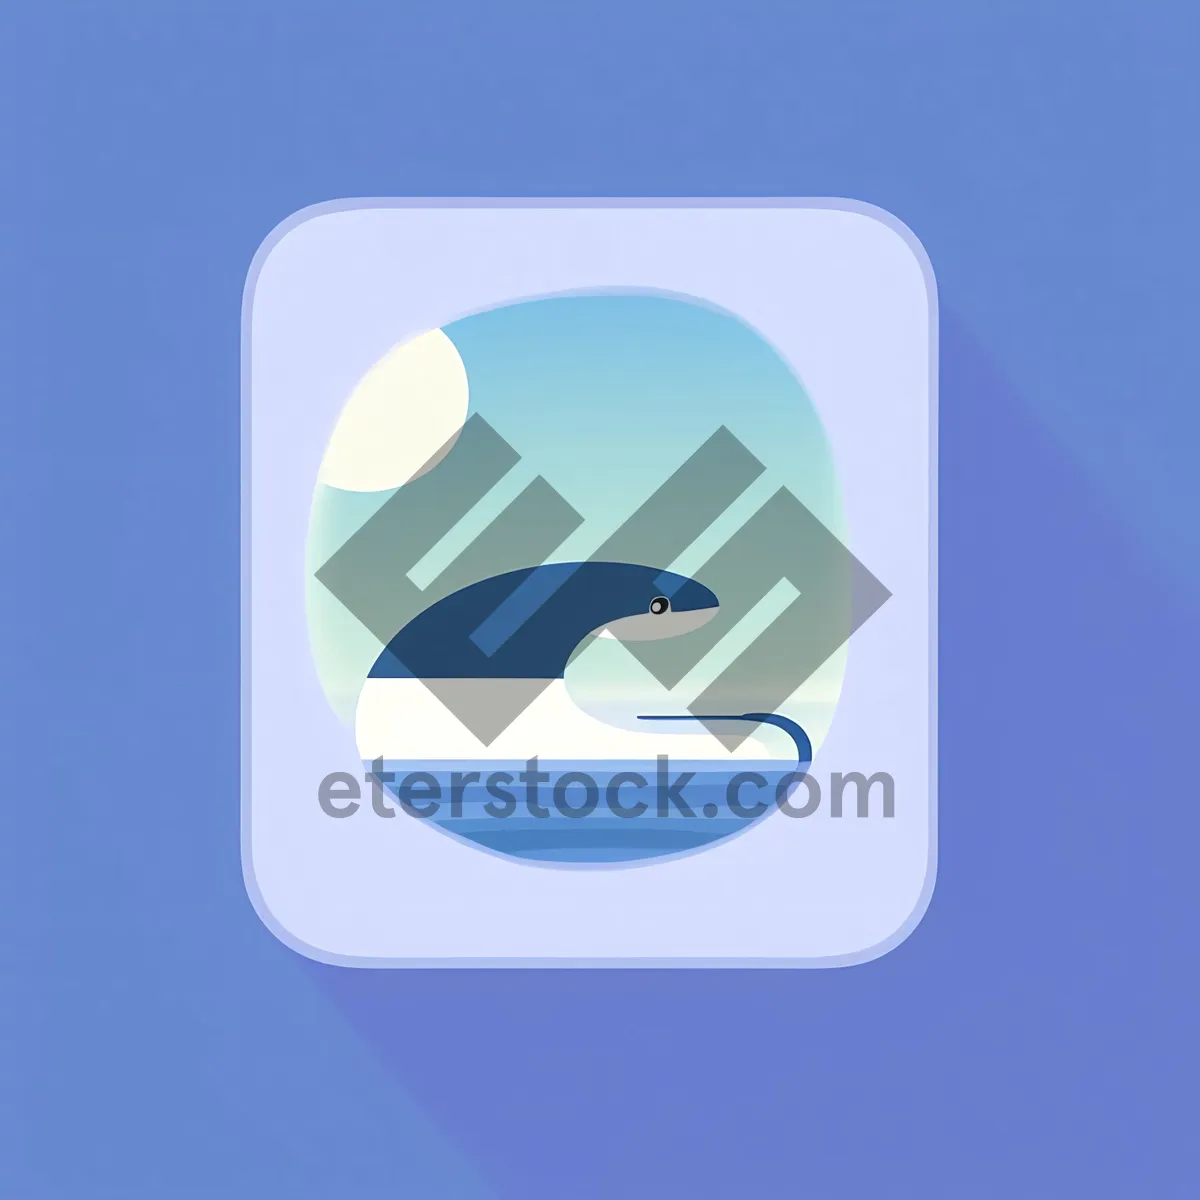 Picture of Modern Button Key on Shiny Square Icon